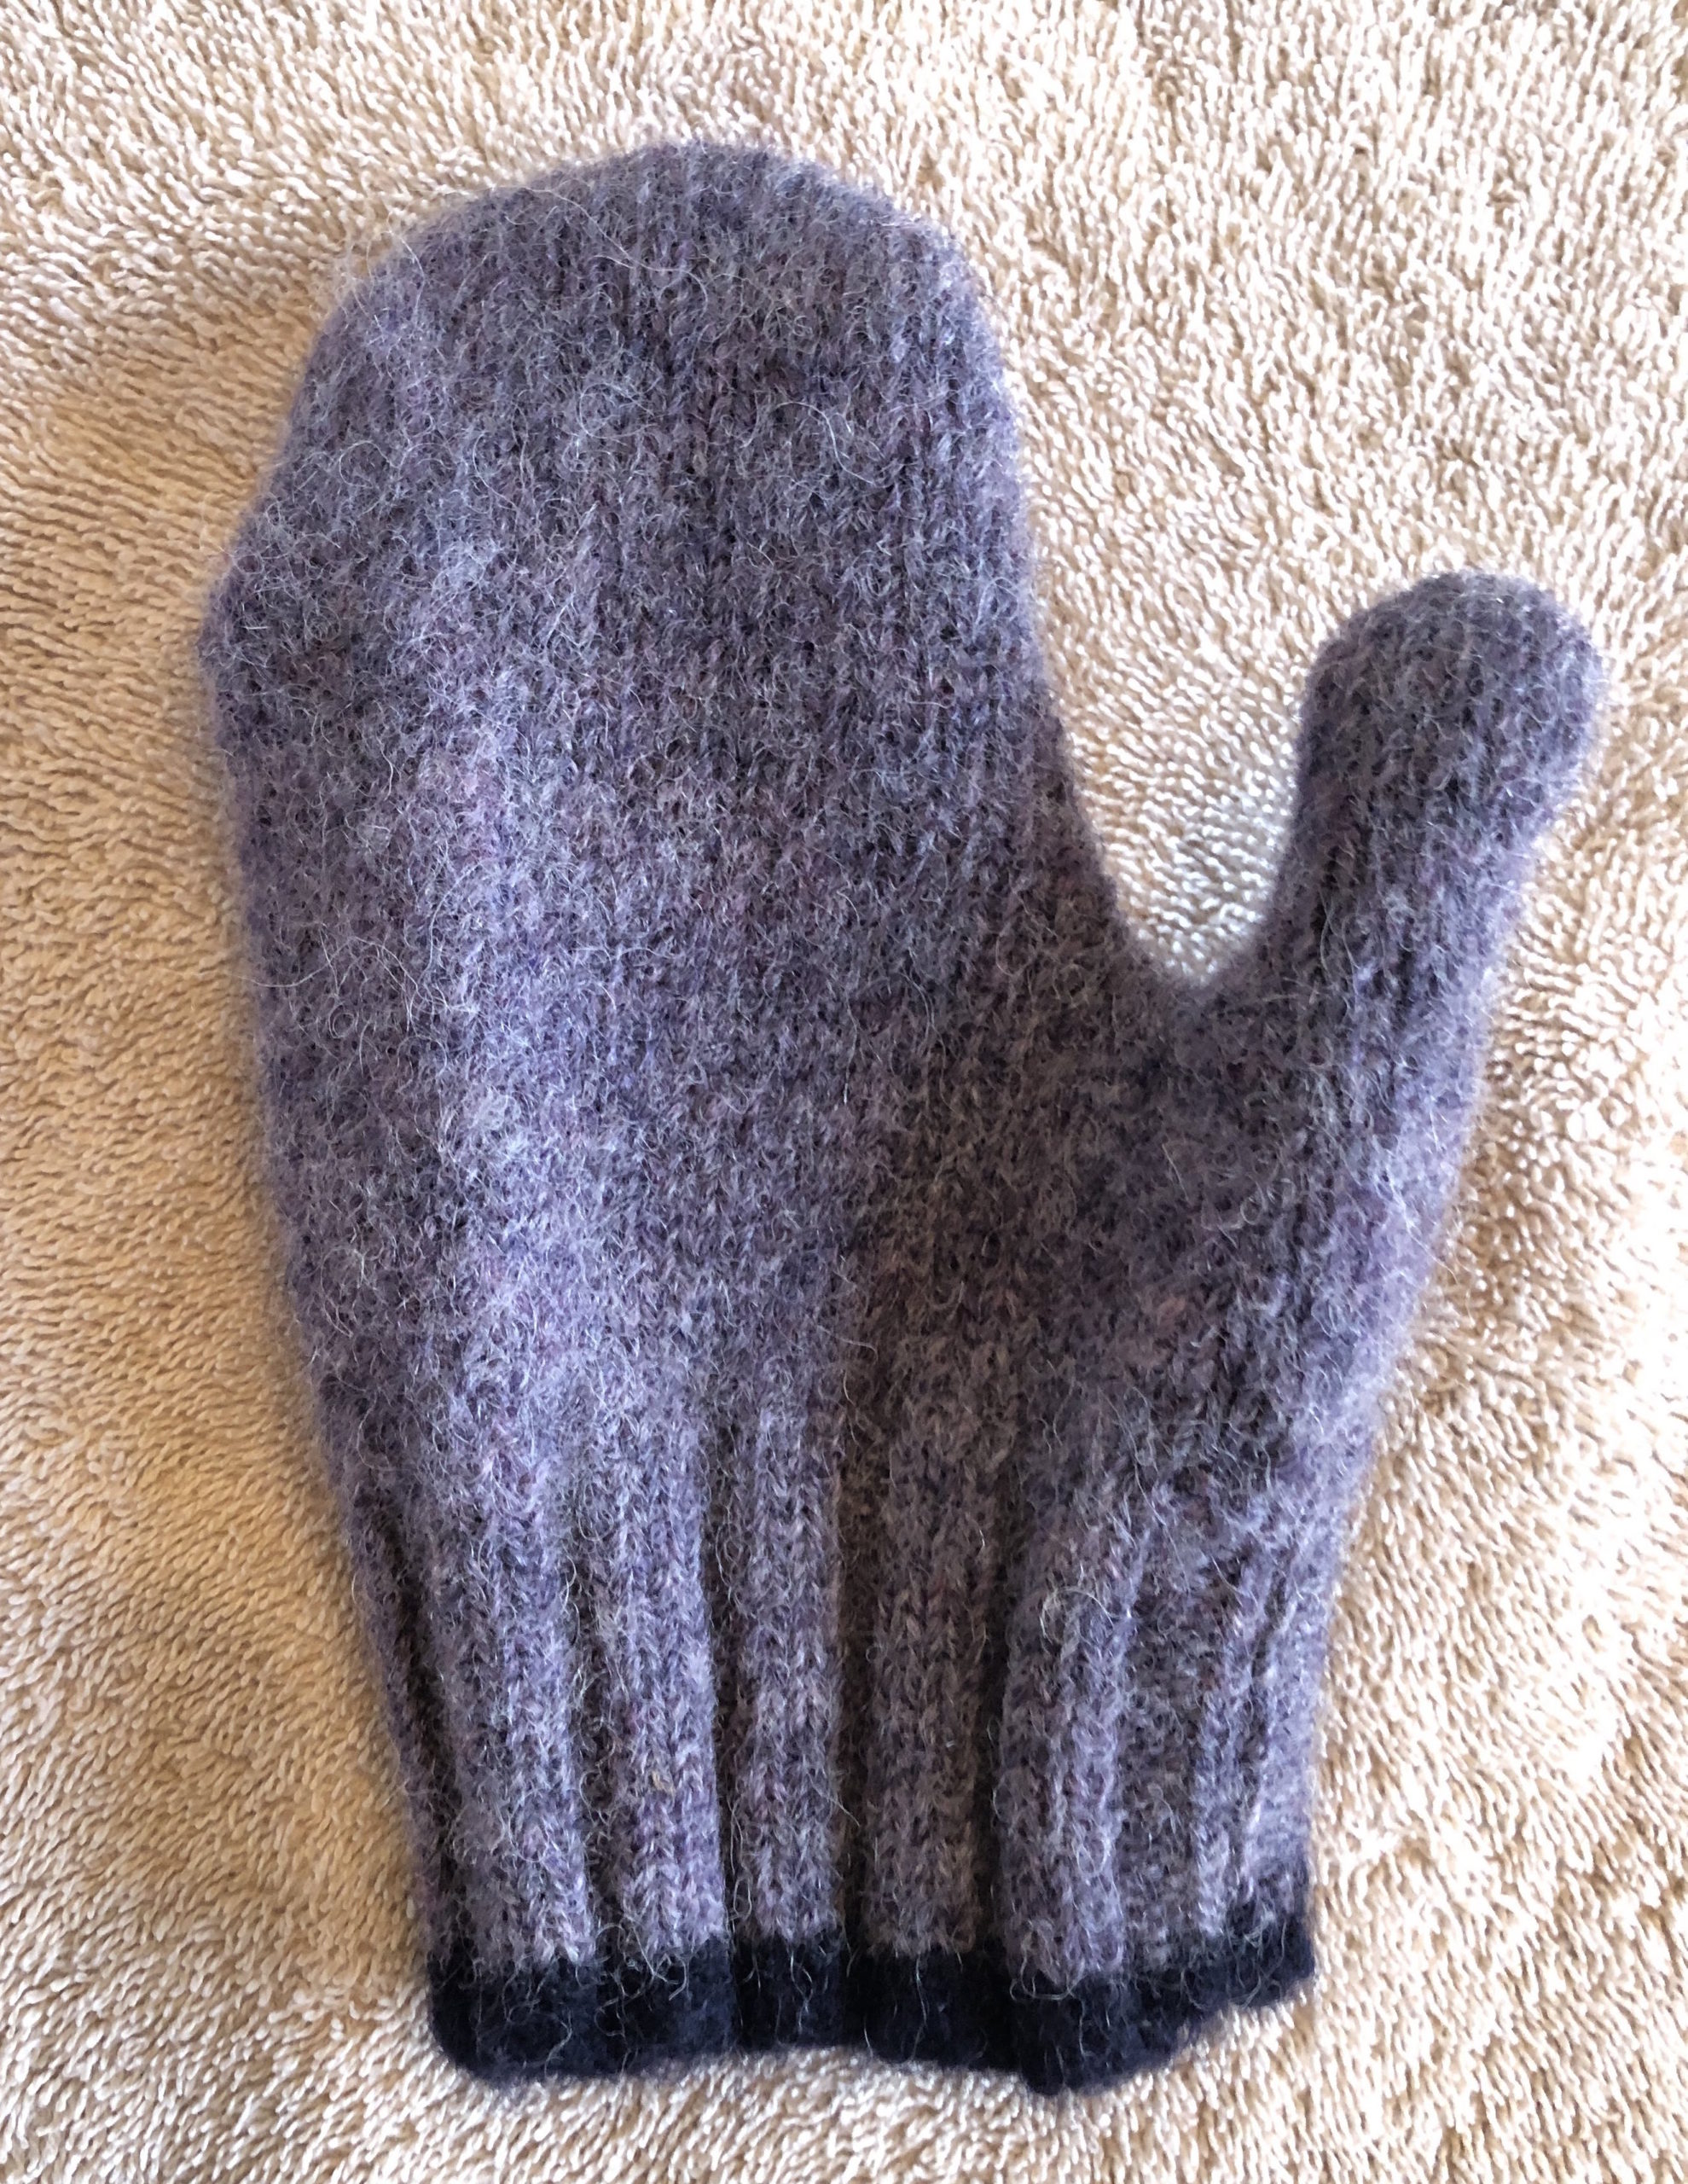 How Not to Knit Woolen Mittens - At Yarn's Length